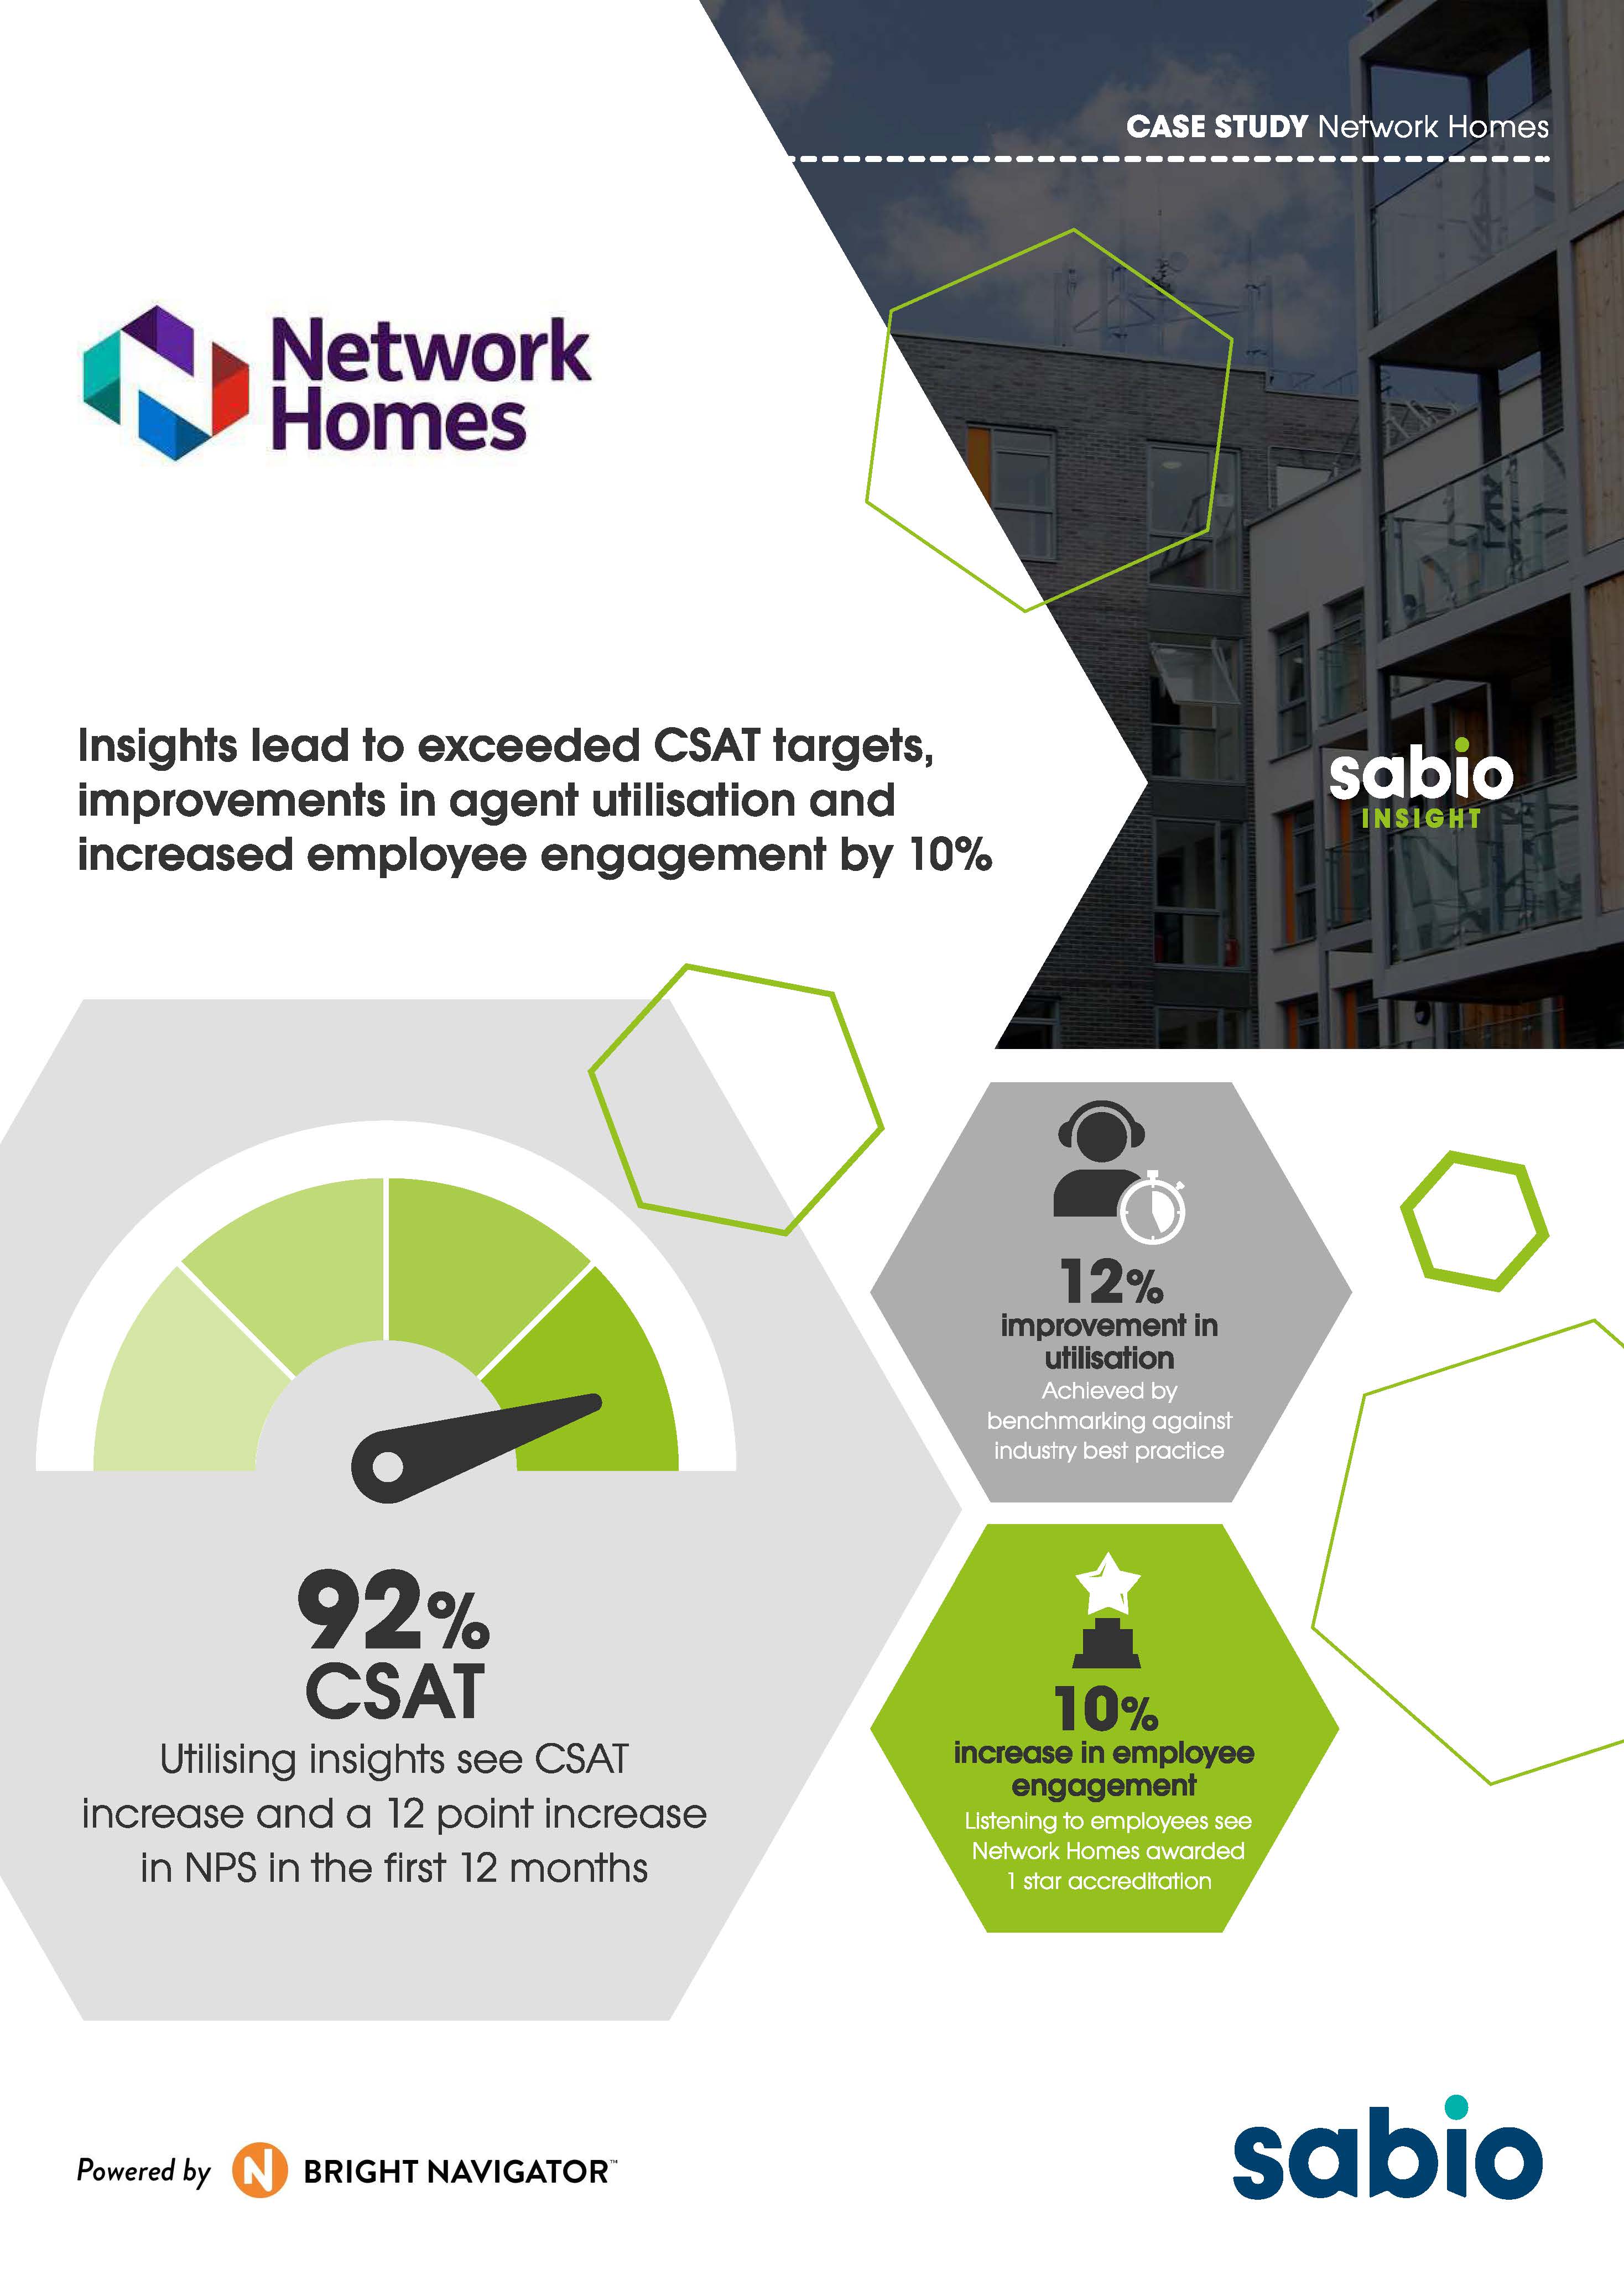 Network Homes - Exceed CSAT targets, Improve Agent Utilisation & Increase Employee Engagement